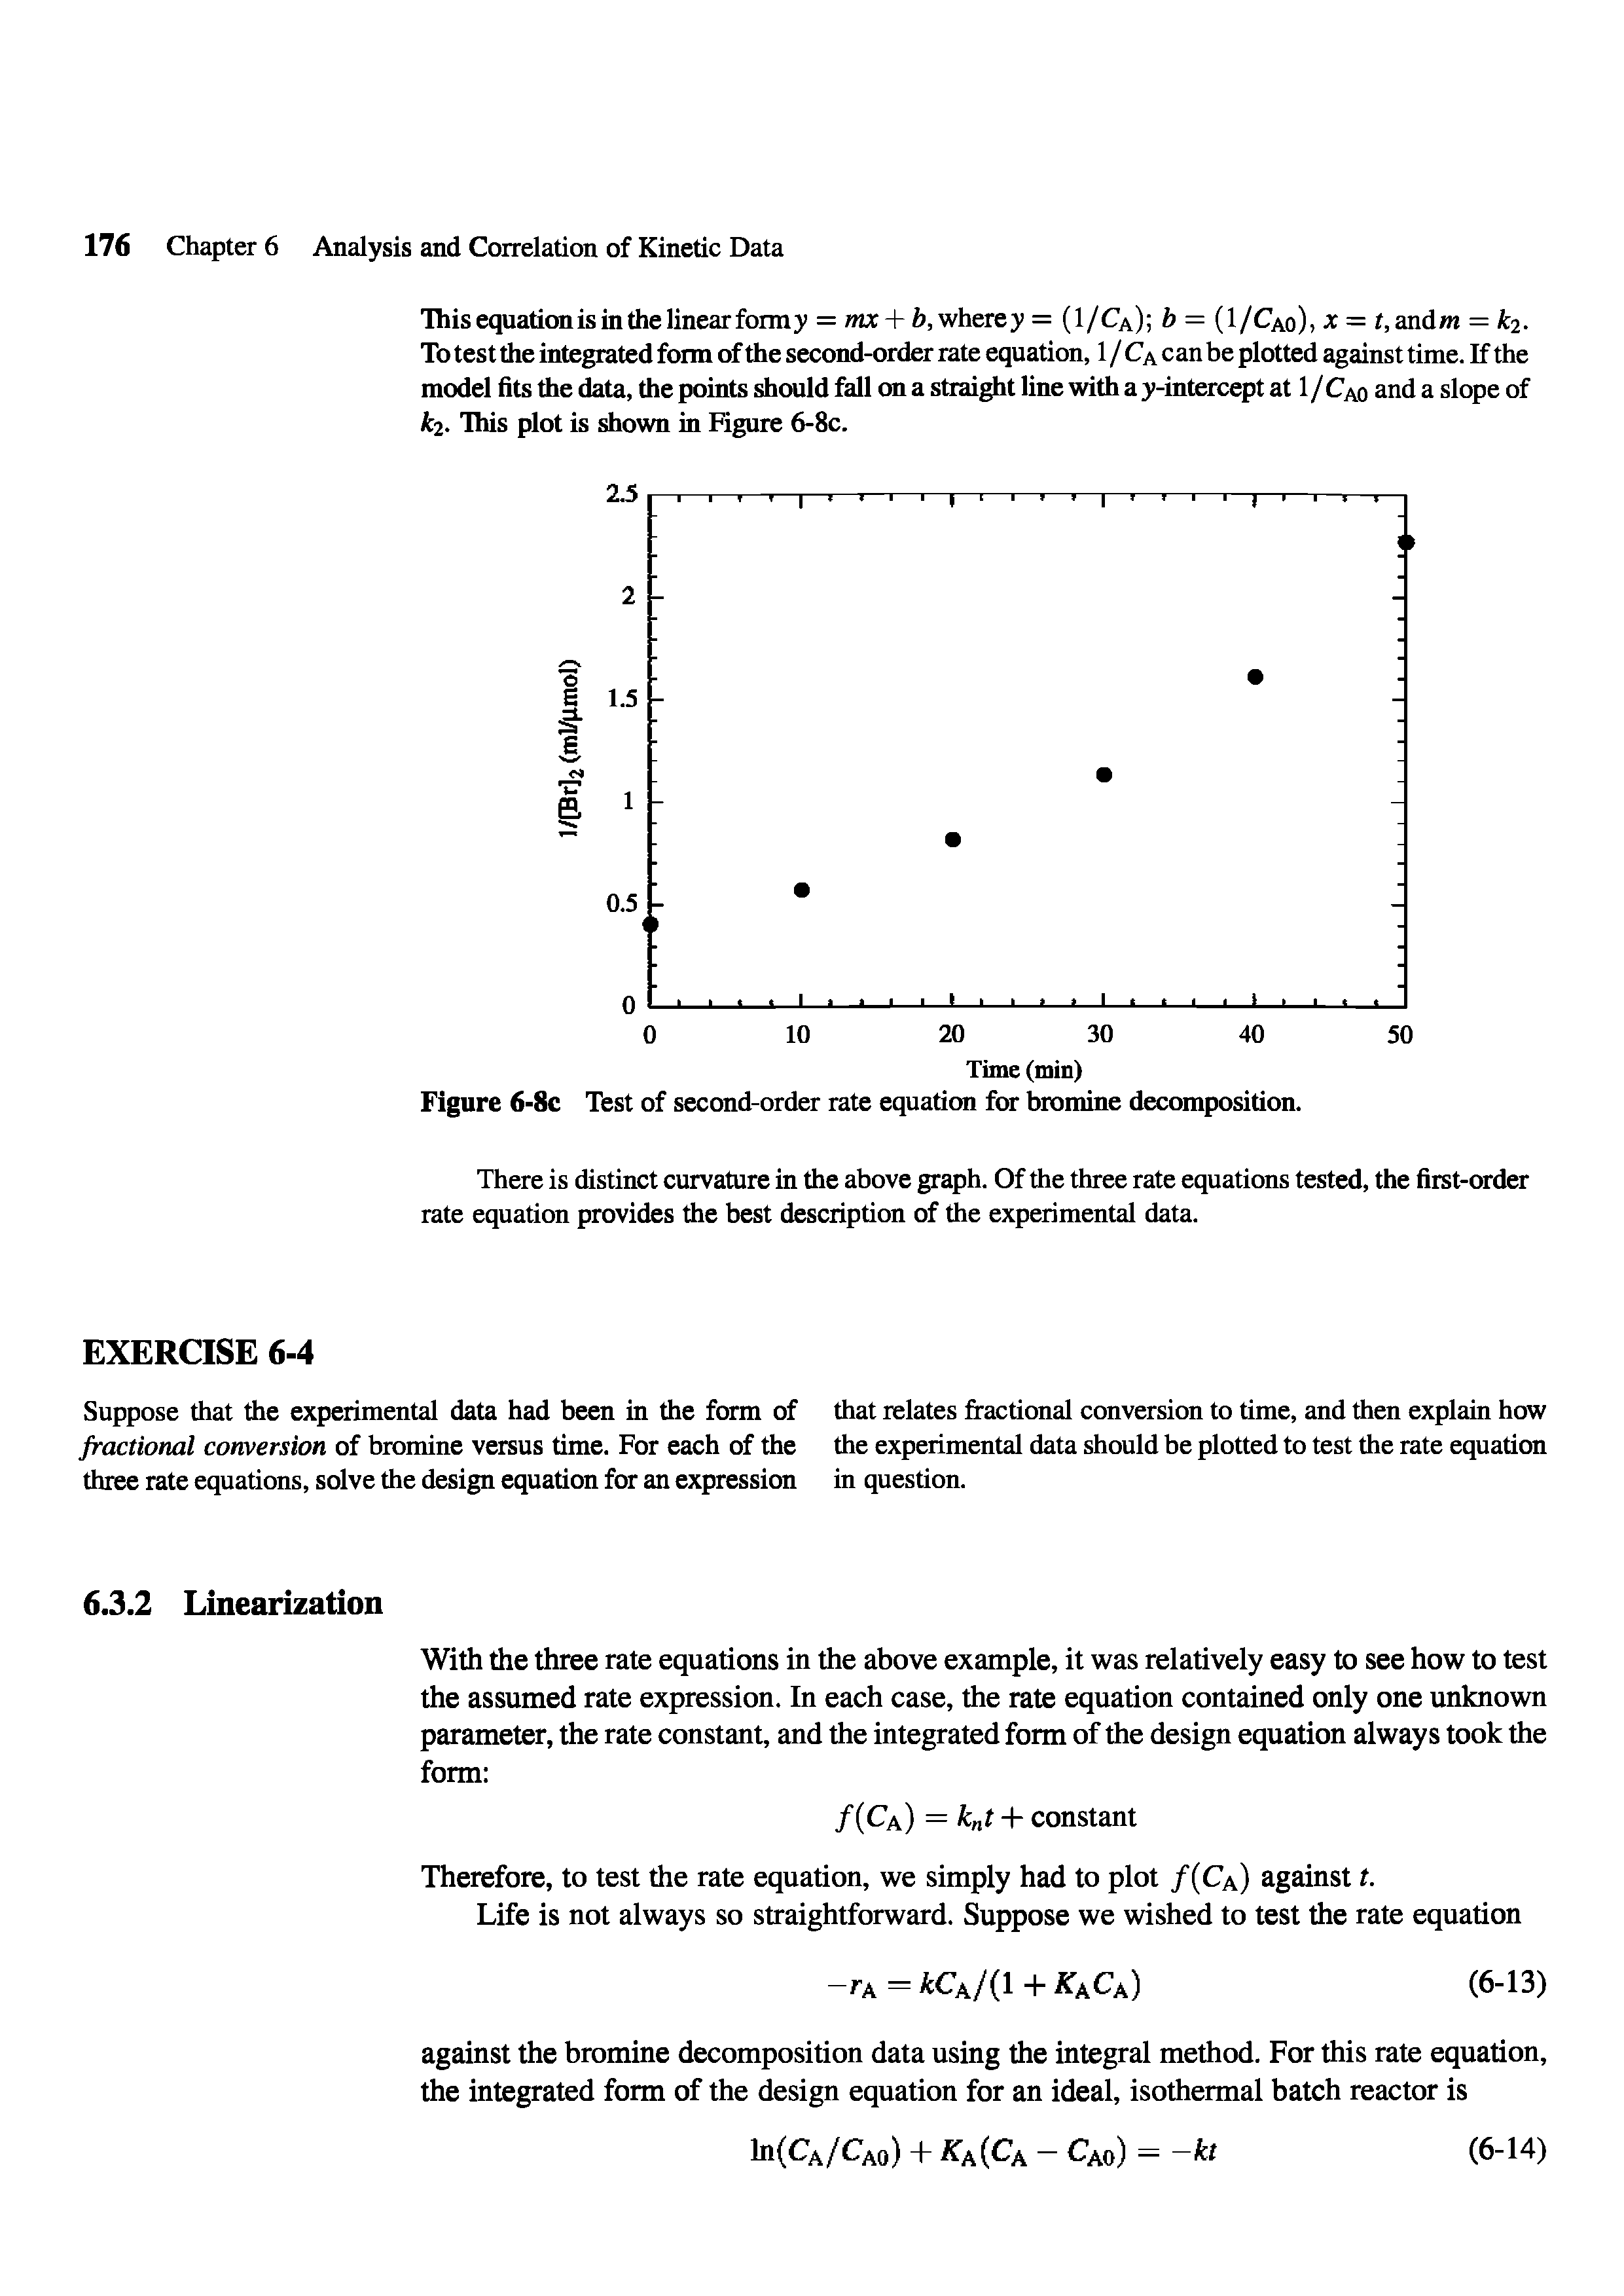 Figure 6-8c Test of second-order rate equation for bromine decomposition.